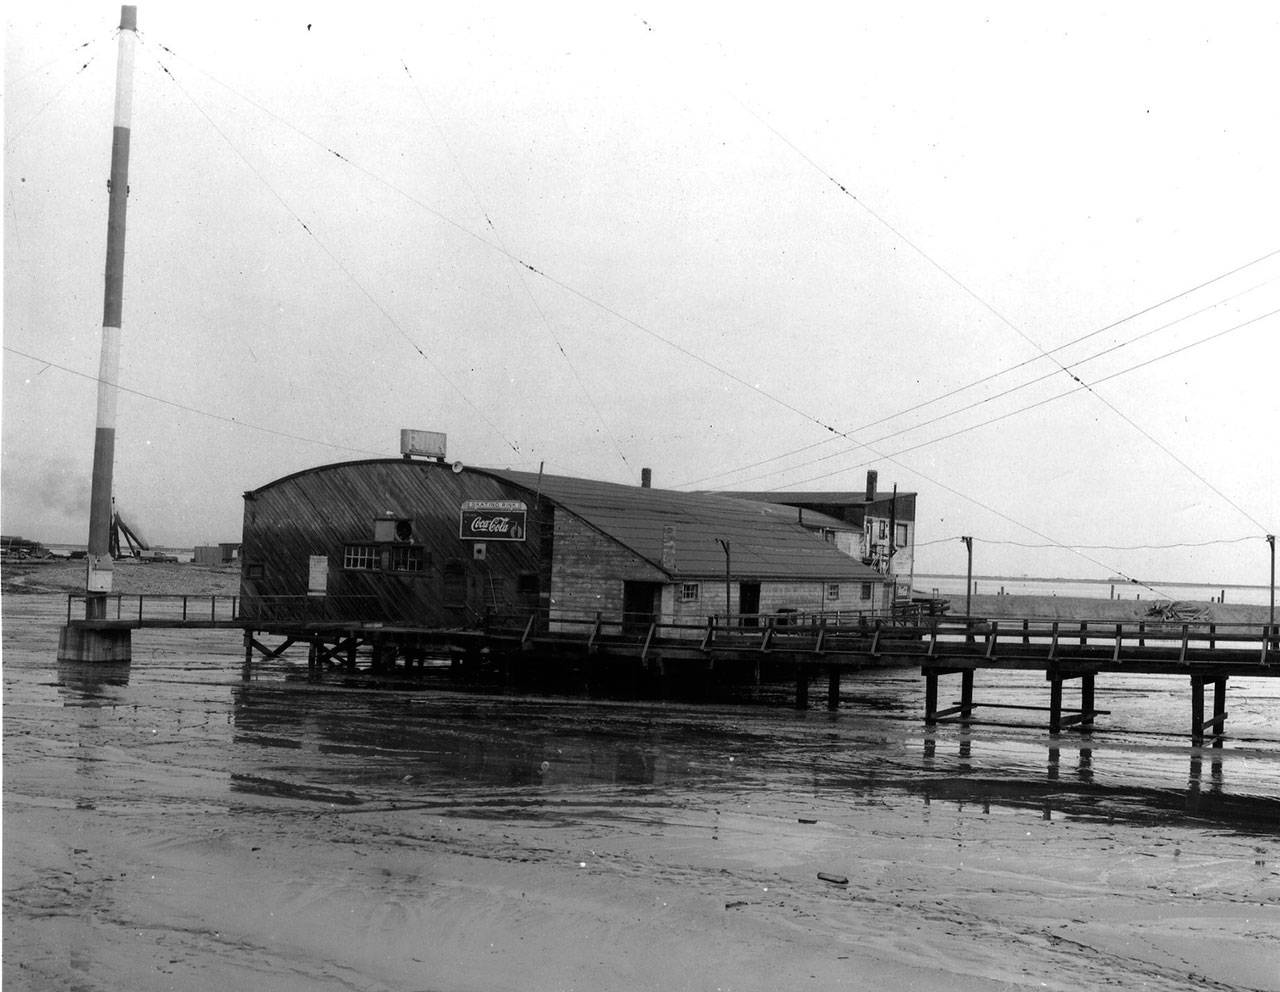 The Pavilion Skating Rink, at Front and Cherry streets in Port Angeles, is shown the 1950s. (Clallam County Historical Society)